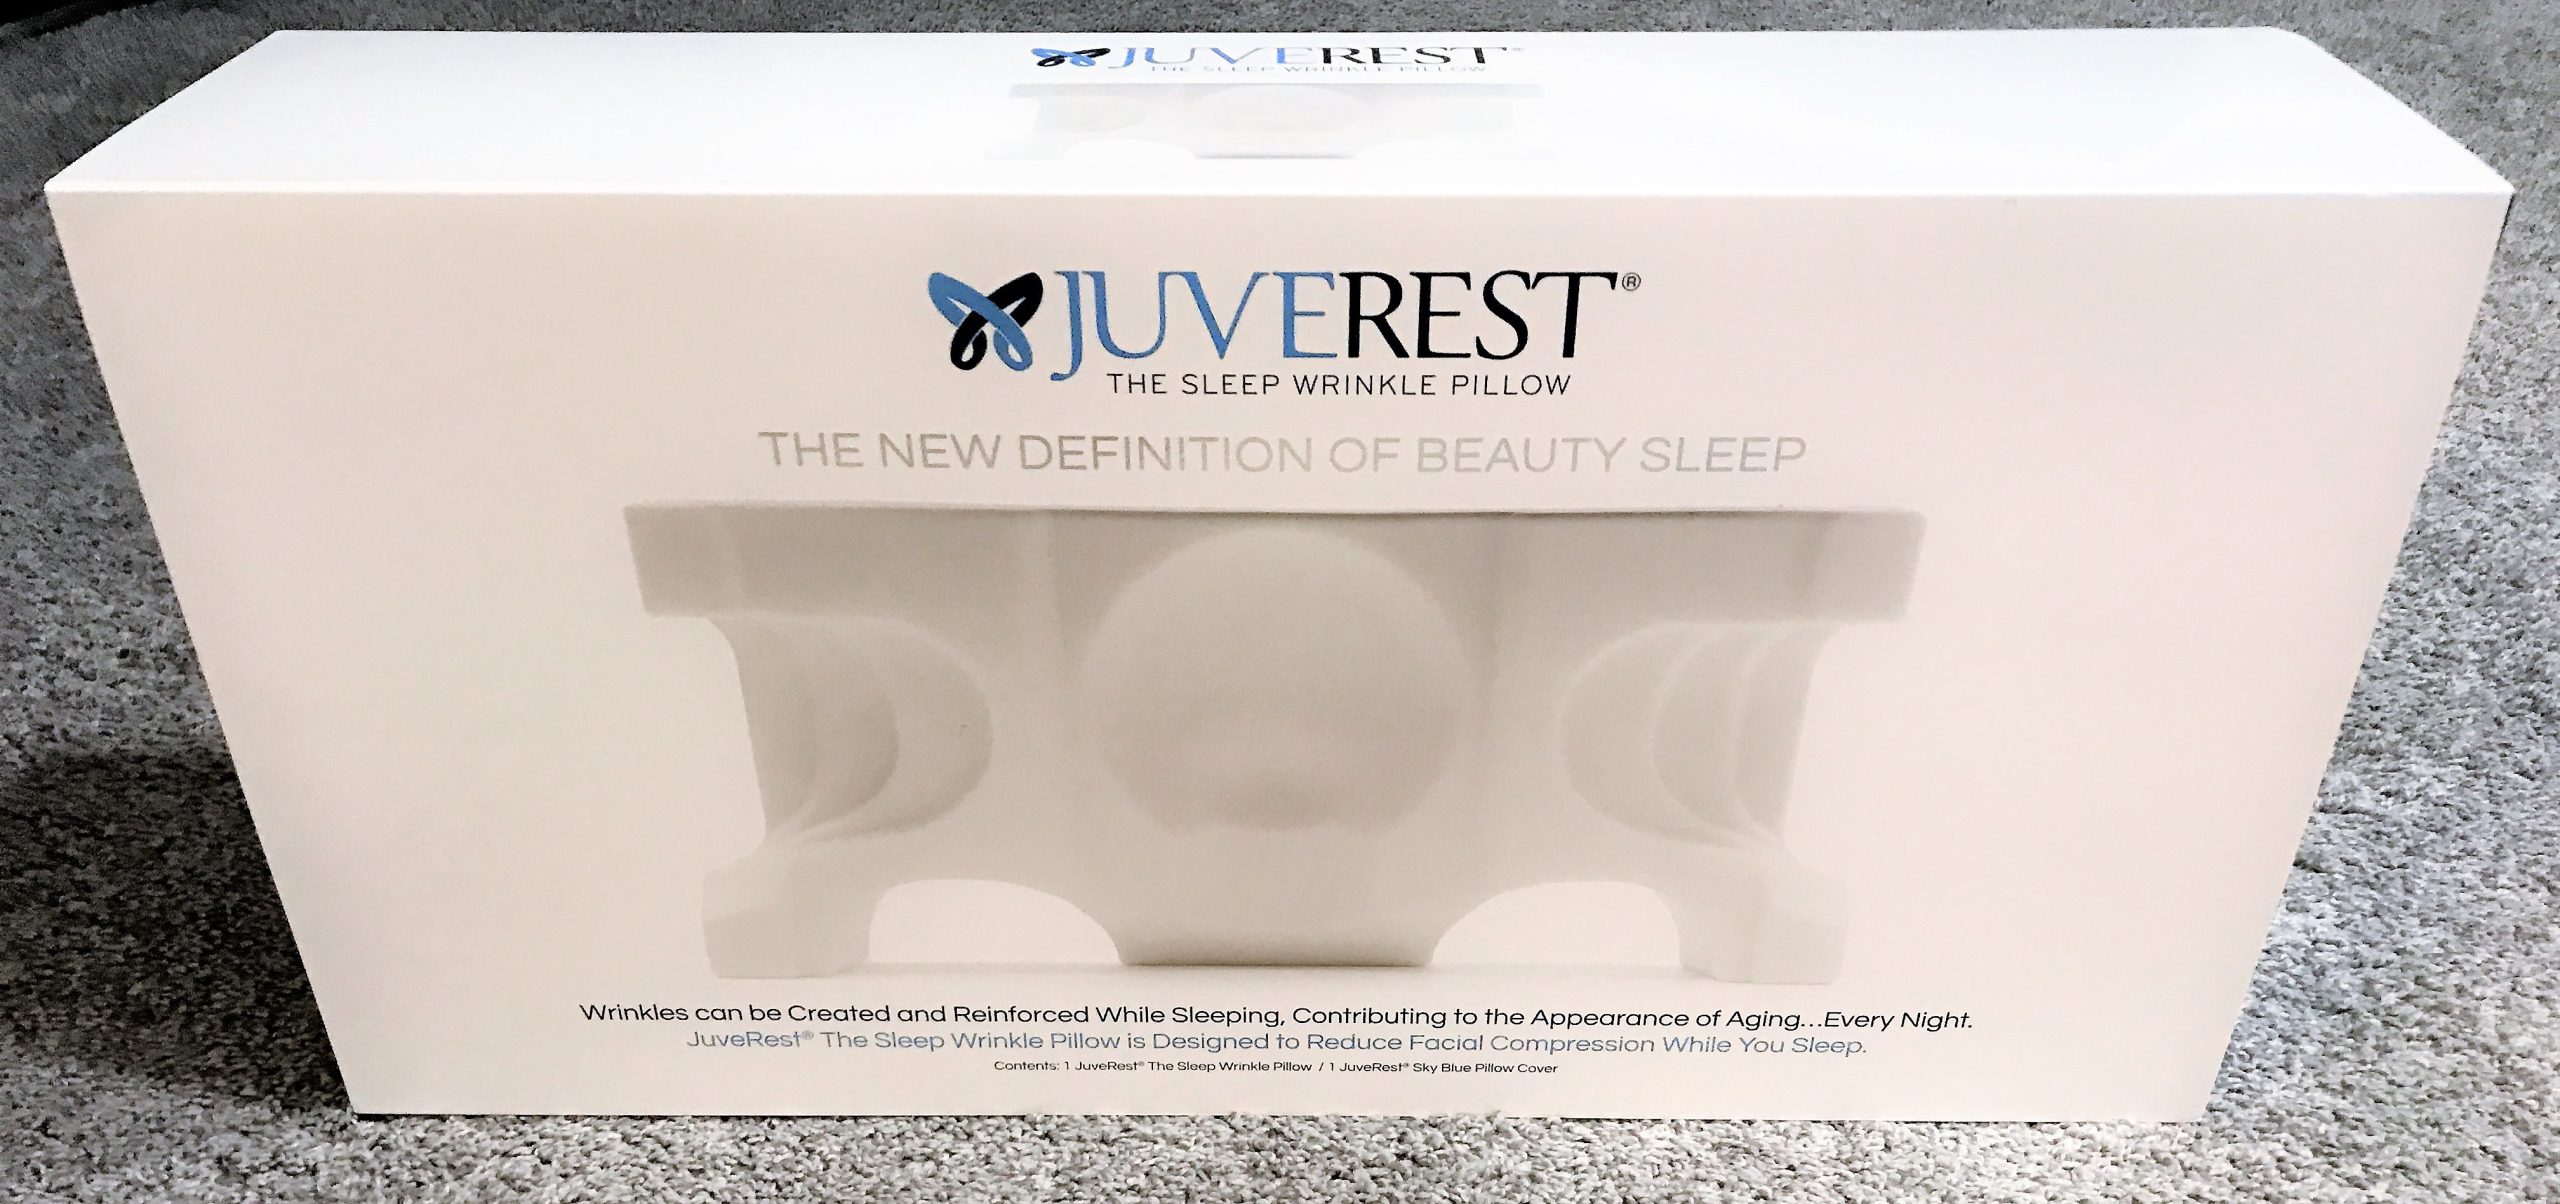 juverest-sleep-wrinkle-pillow-review-1